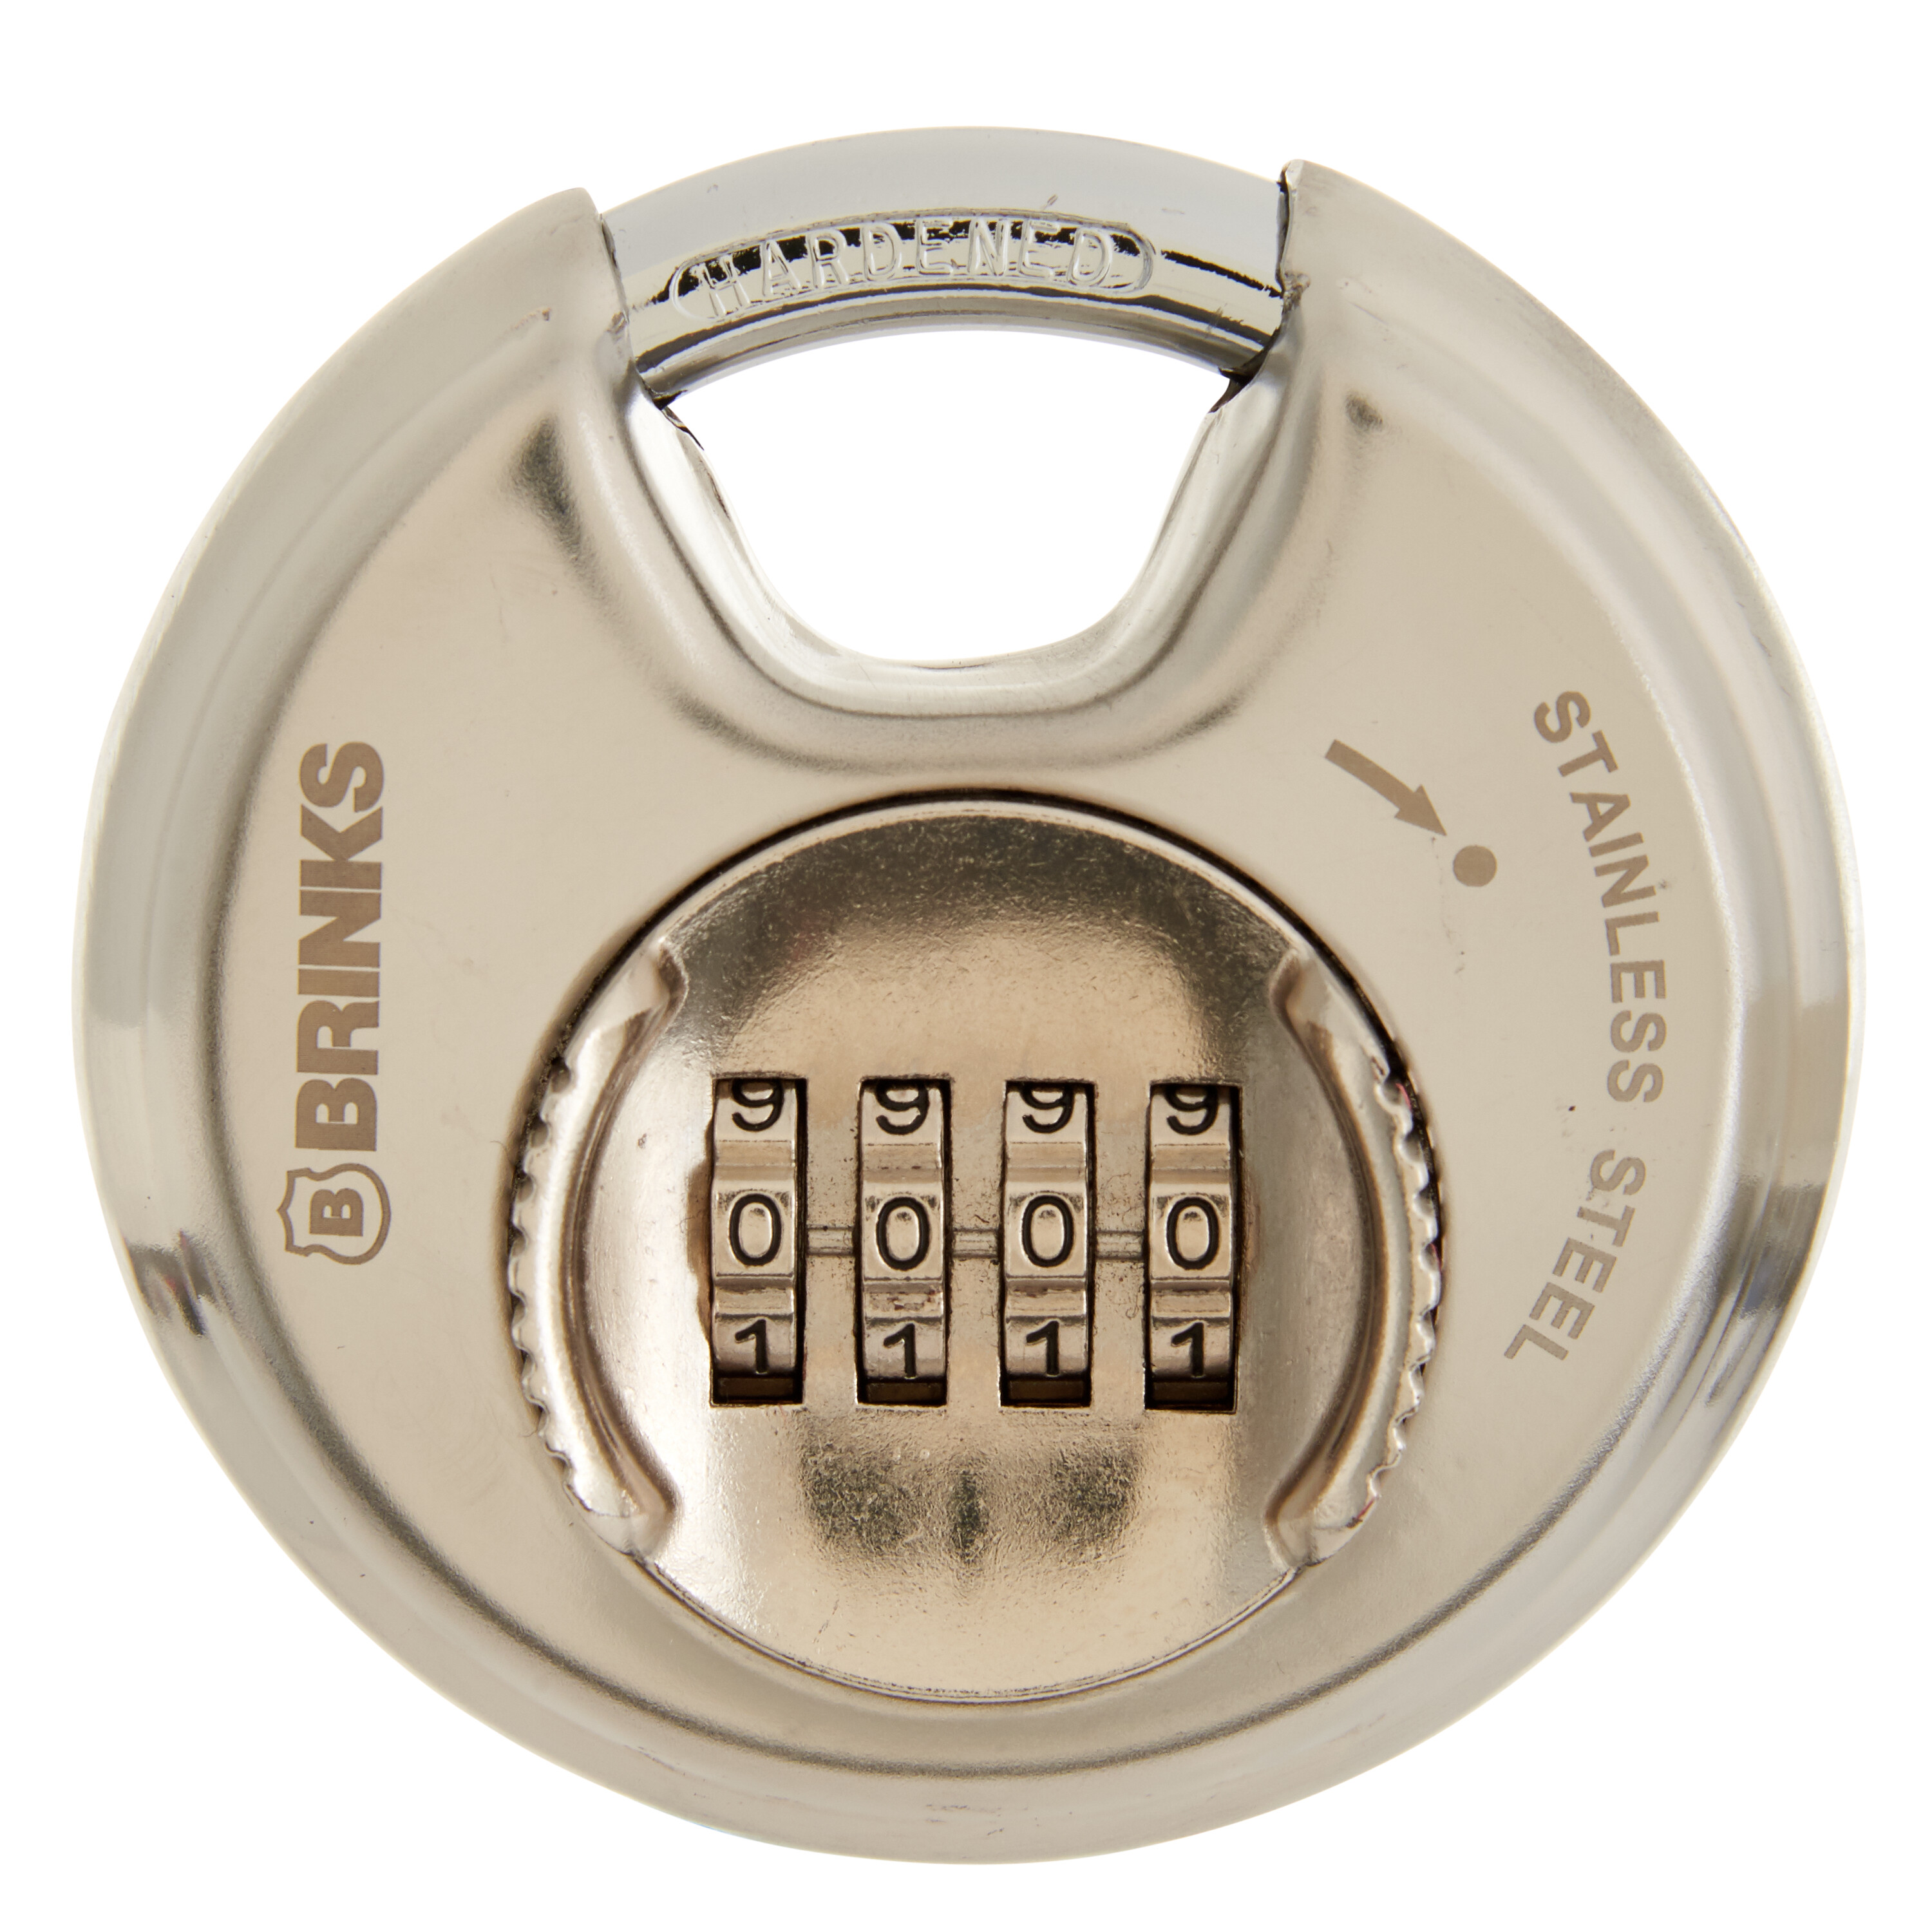 Brink S Padlocks 173 80051 80mm Stainless Steel Discus Padlock With 4 Dial Resettable Combination